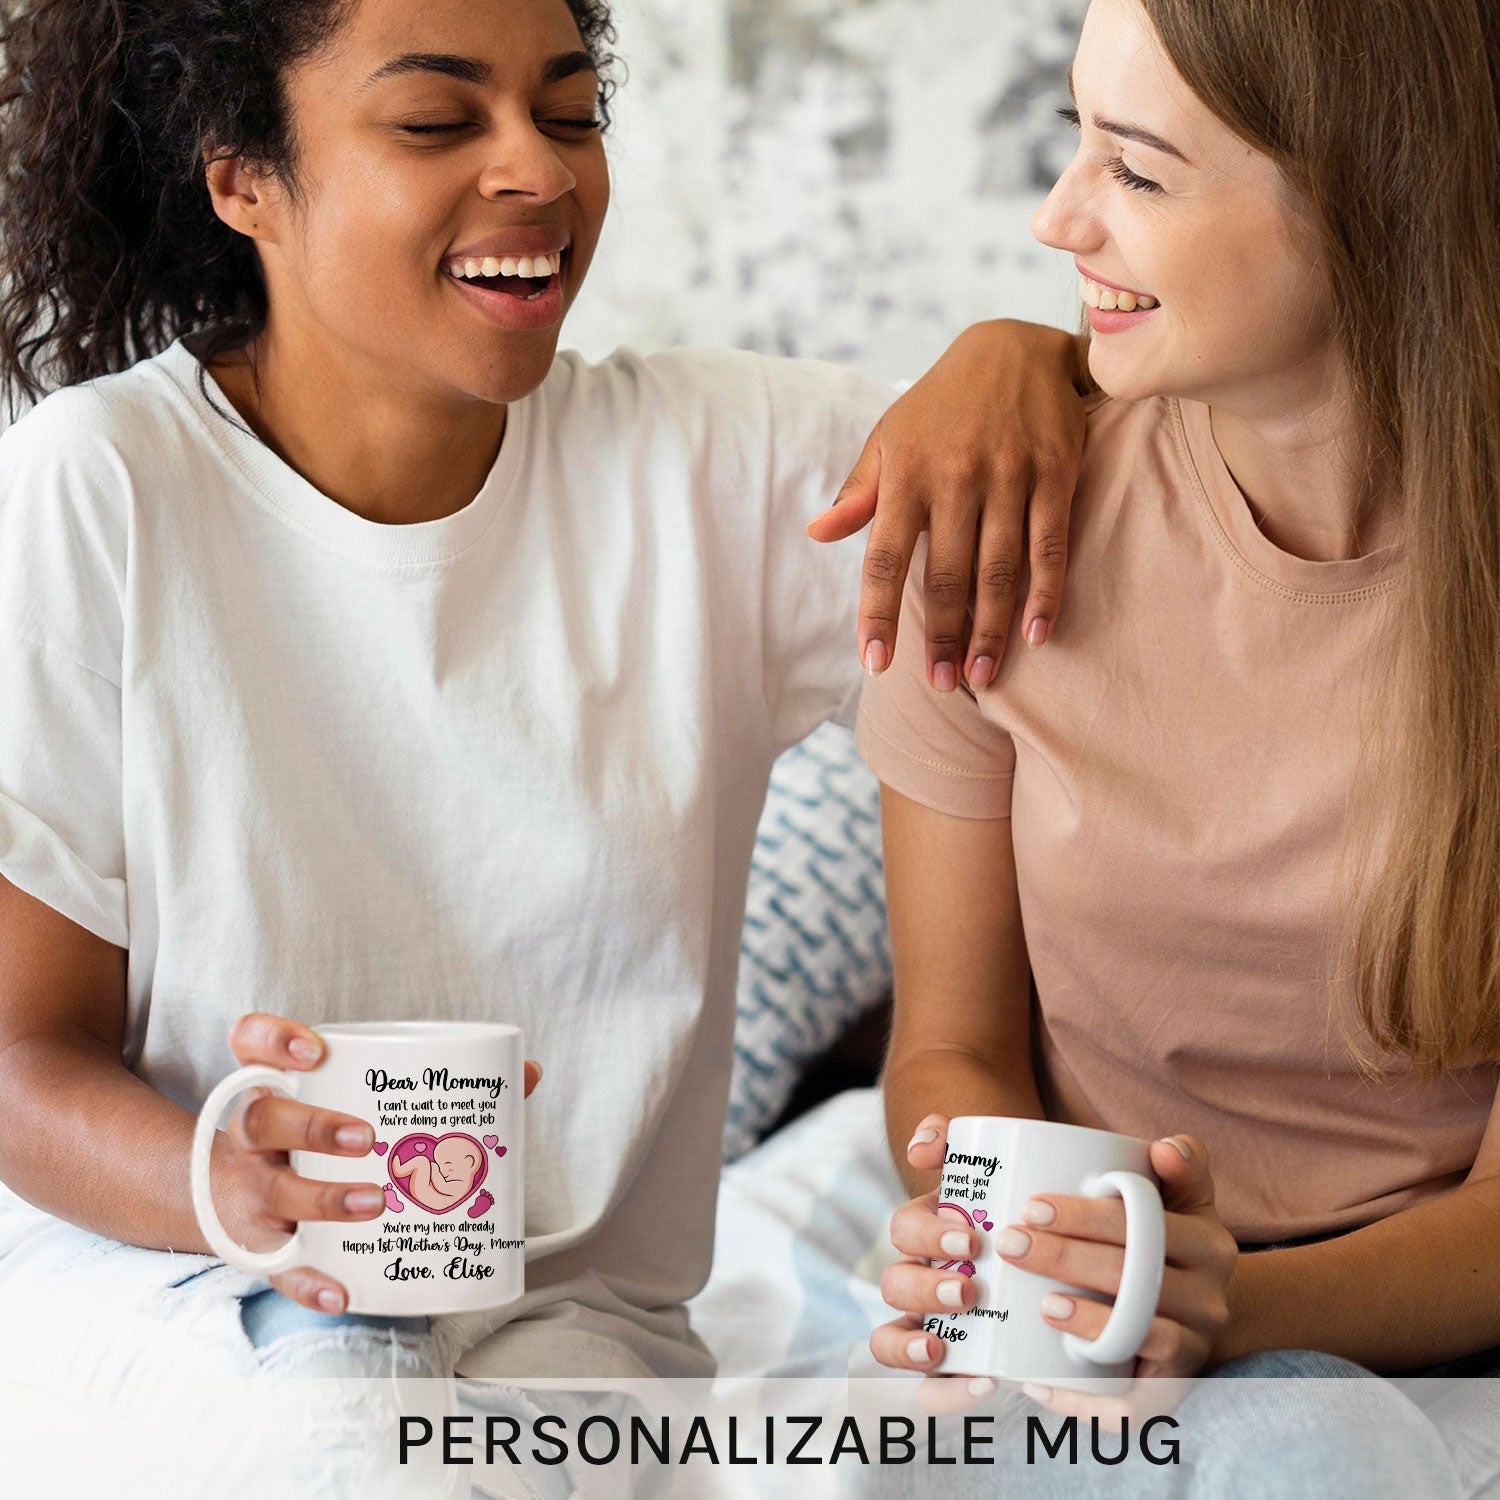 You're My Hero Already - Personalized First Mother's Day gift For Mom To Be - Custom Mug - MyMindfulGifts